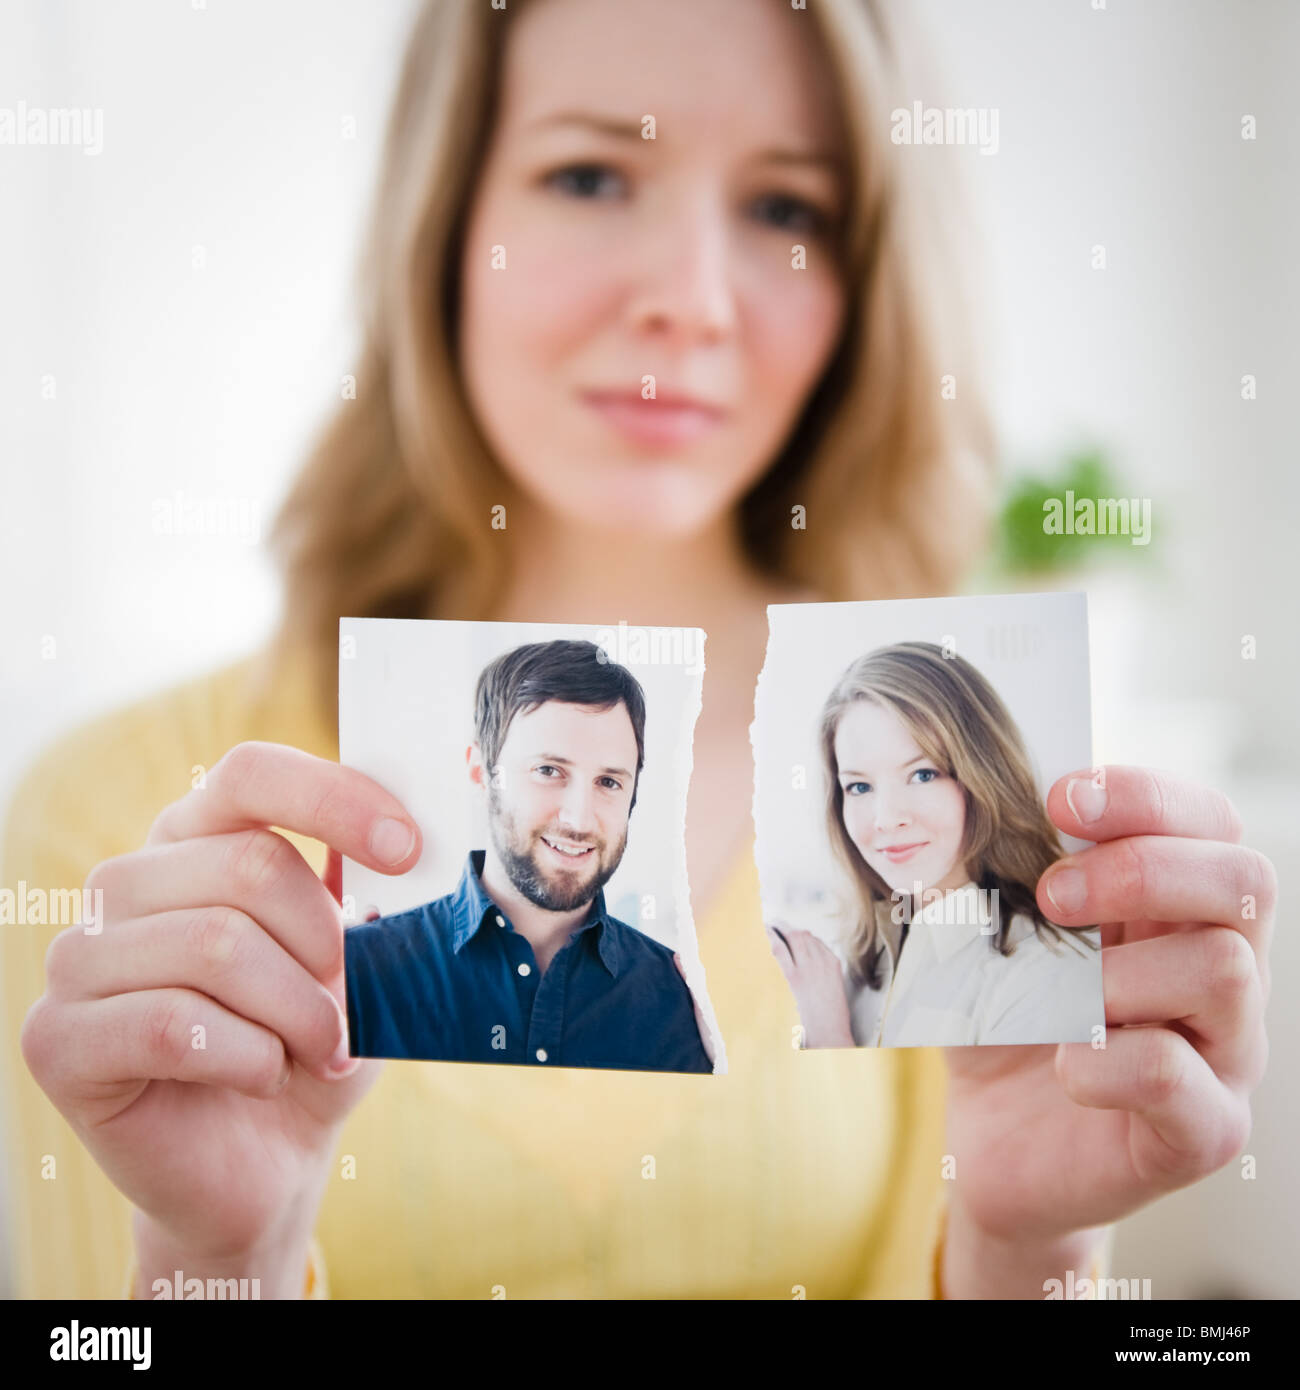 Woman holding torn photograph Stock Photo